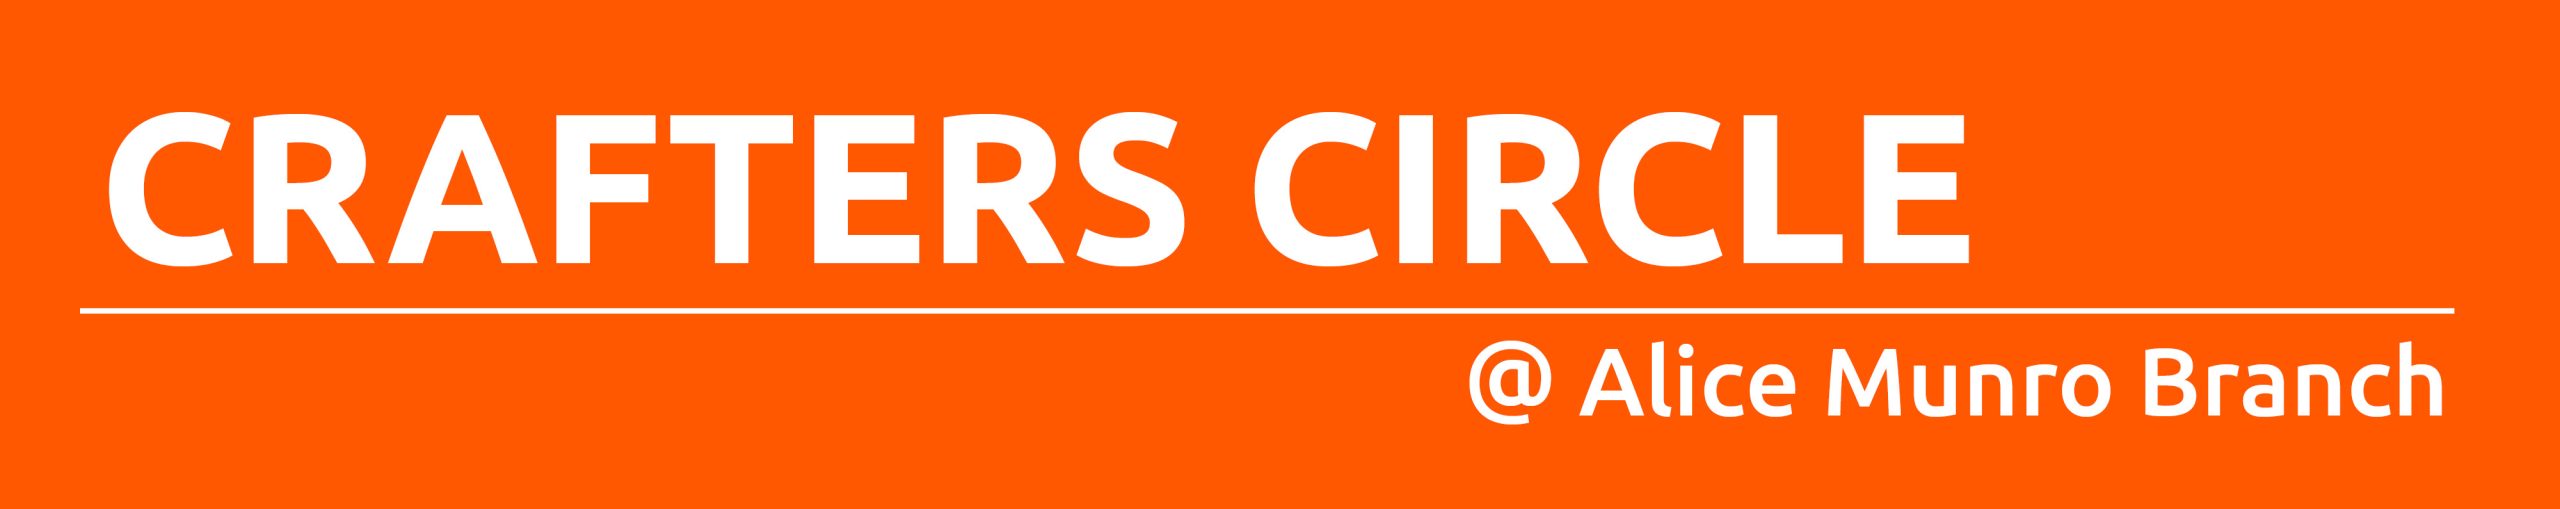 Dark orange rectangle with text promoting crafters circle at Alice Munro Branch, Wingham